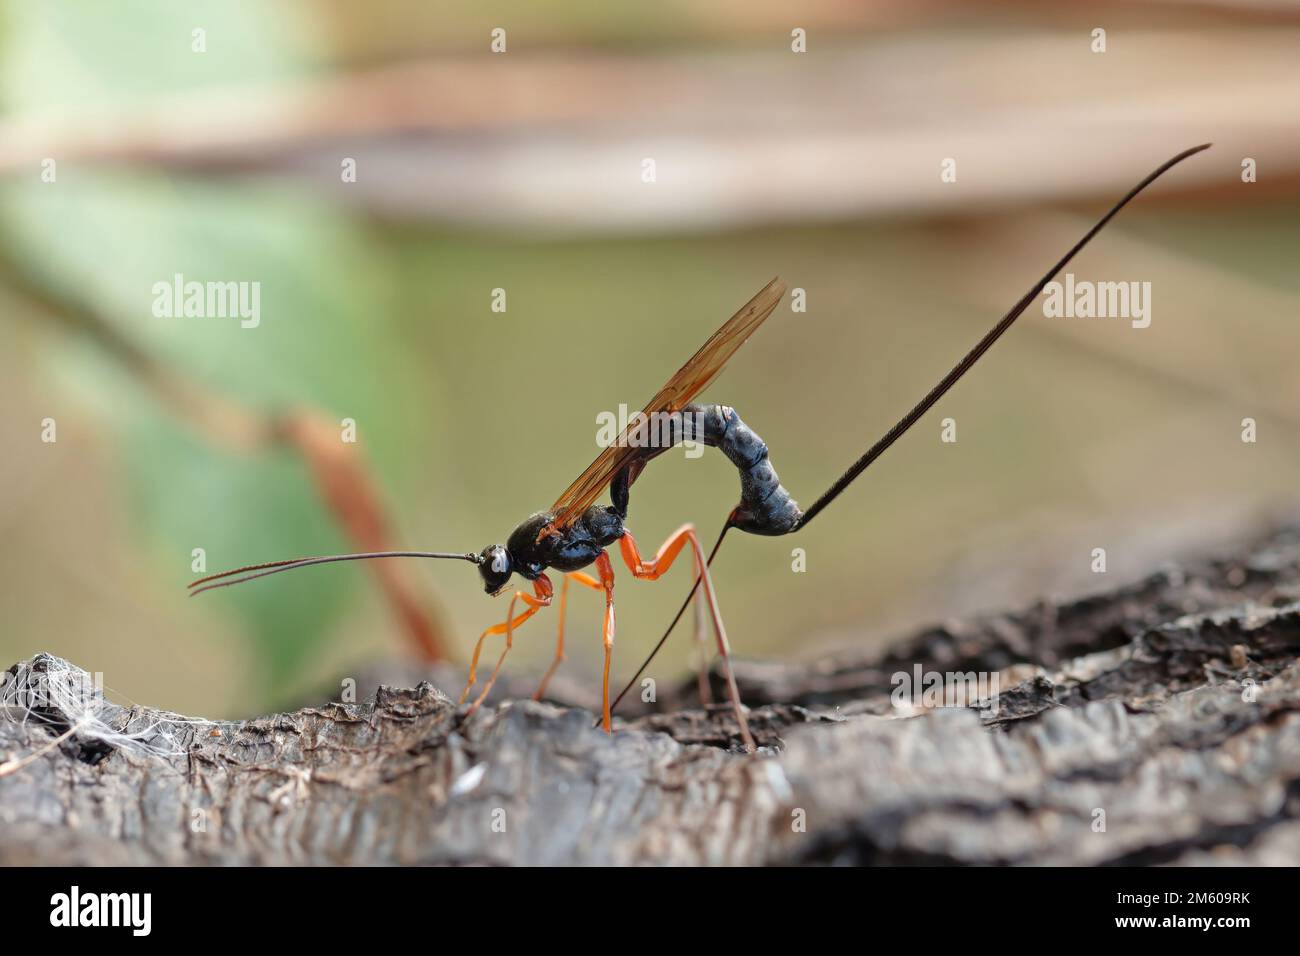 Ichneumon wasp (Dolichomitus imperator). The wasp deposits its eggs into a host larva. Stock Photo